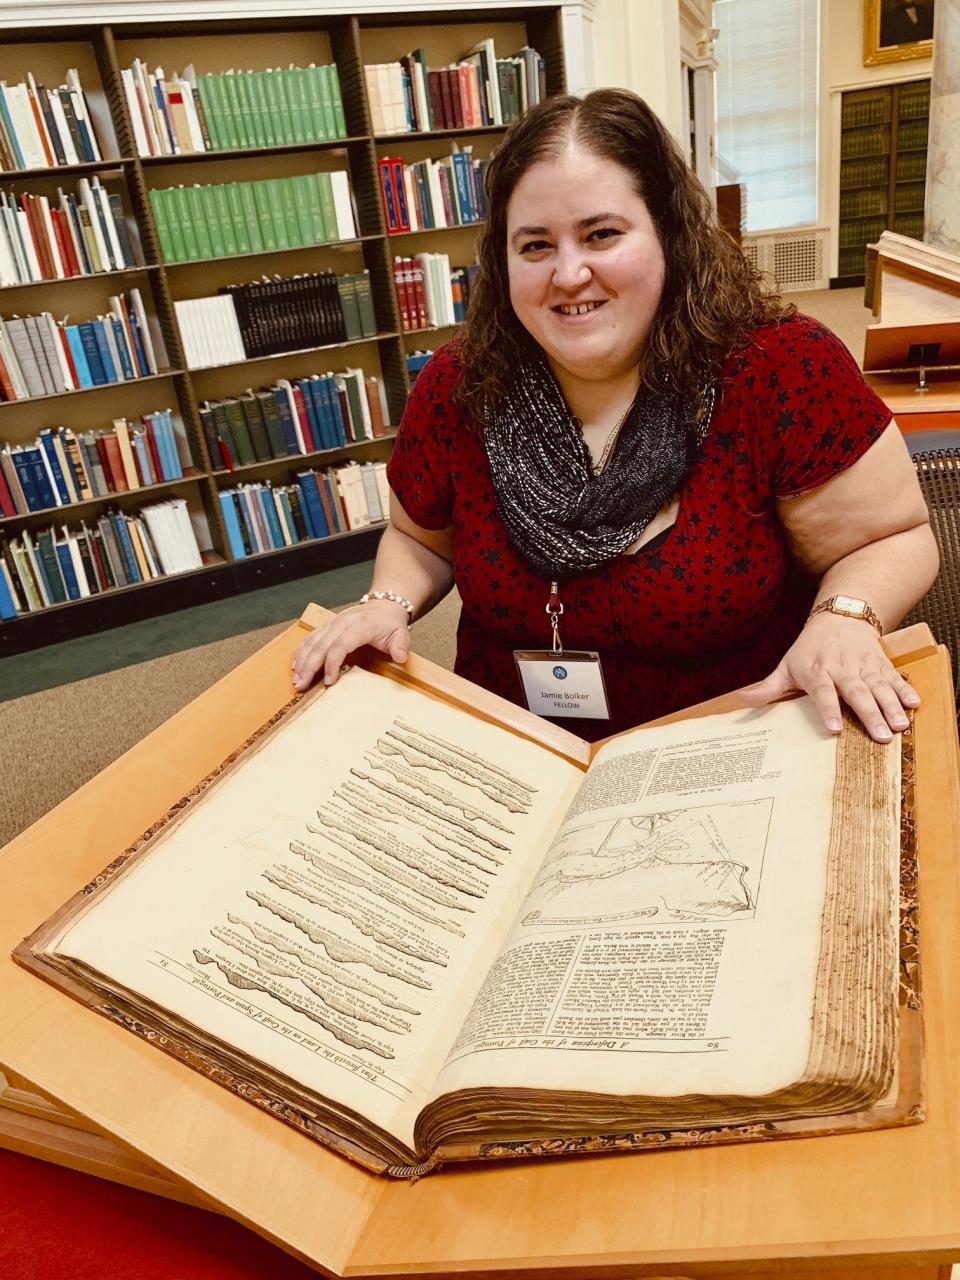 This May 2019 photo provided by Ben Bascom shows Jamie Bolker while doing research at the American Antiquarian Society in Worcester, Mass. When Bolker started teaching composition at MacMurray College in January 2020, she felt like she'd won the lottery. In March, though, she delivered a grim Twitter announcement: “Welp. MacMurray College is permanently closing ... They were already on the edge and coronavirus was the final nail.” (Ben Bascom via AP)